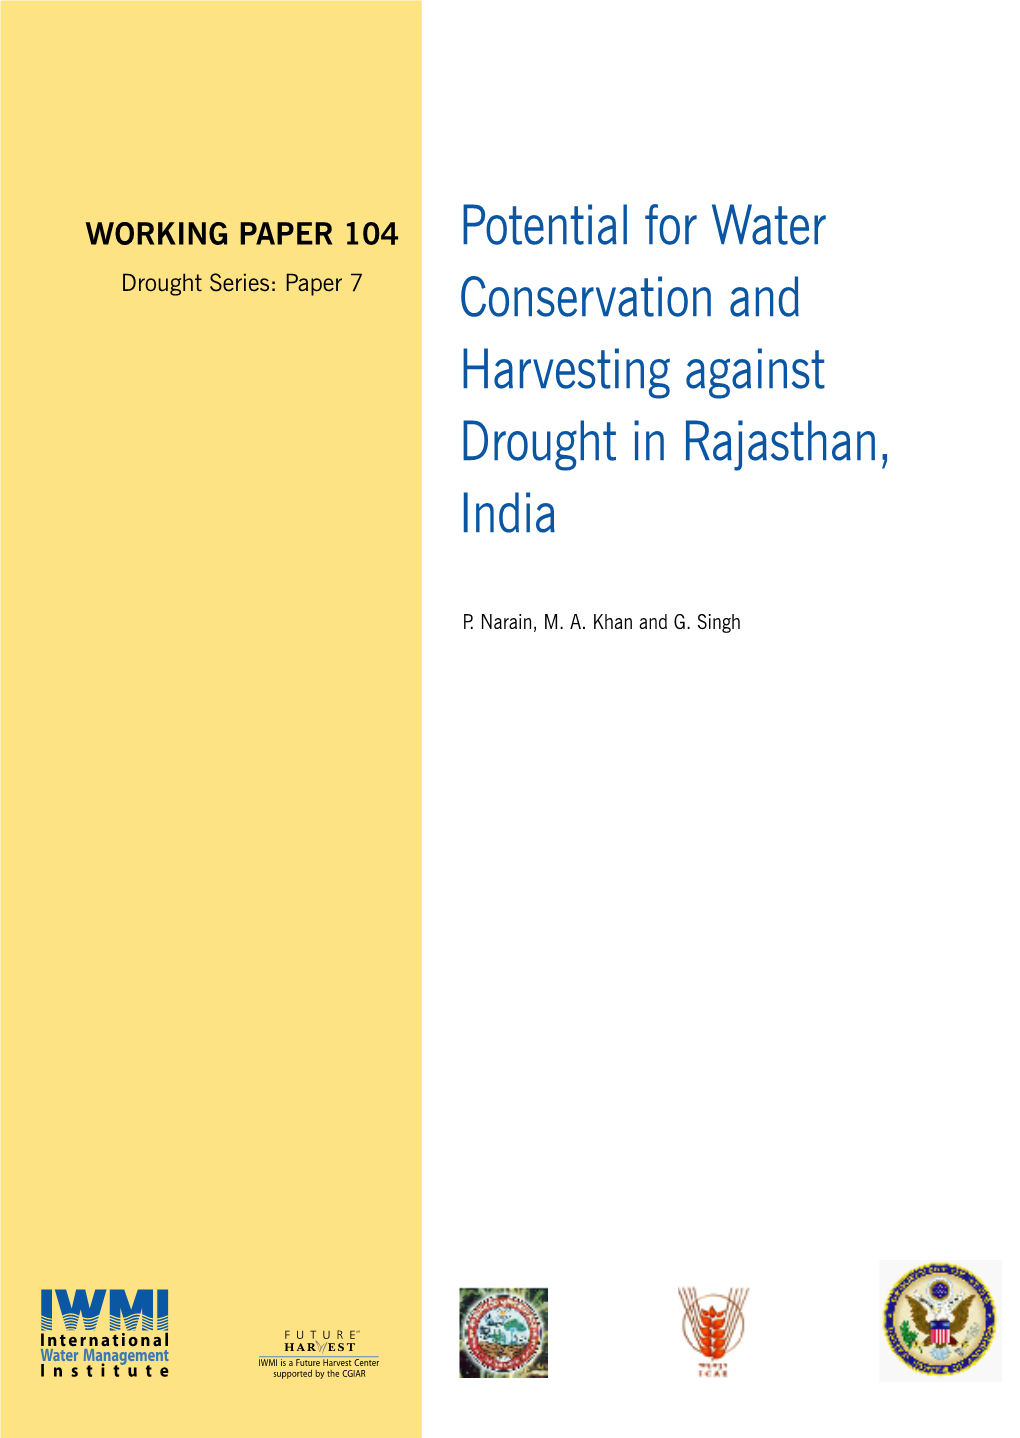 Potential for Water Conservation and Harvesting Against Drought in Rajasthan, India